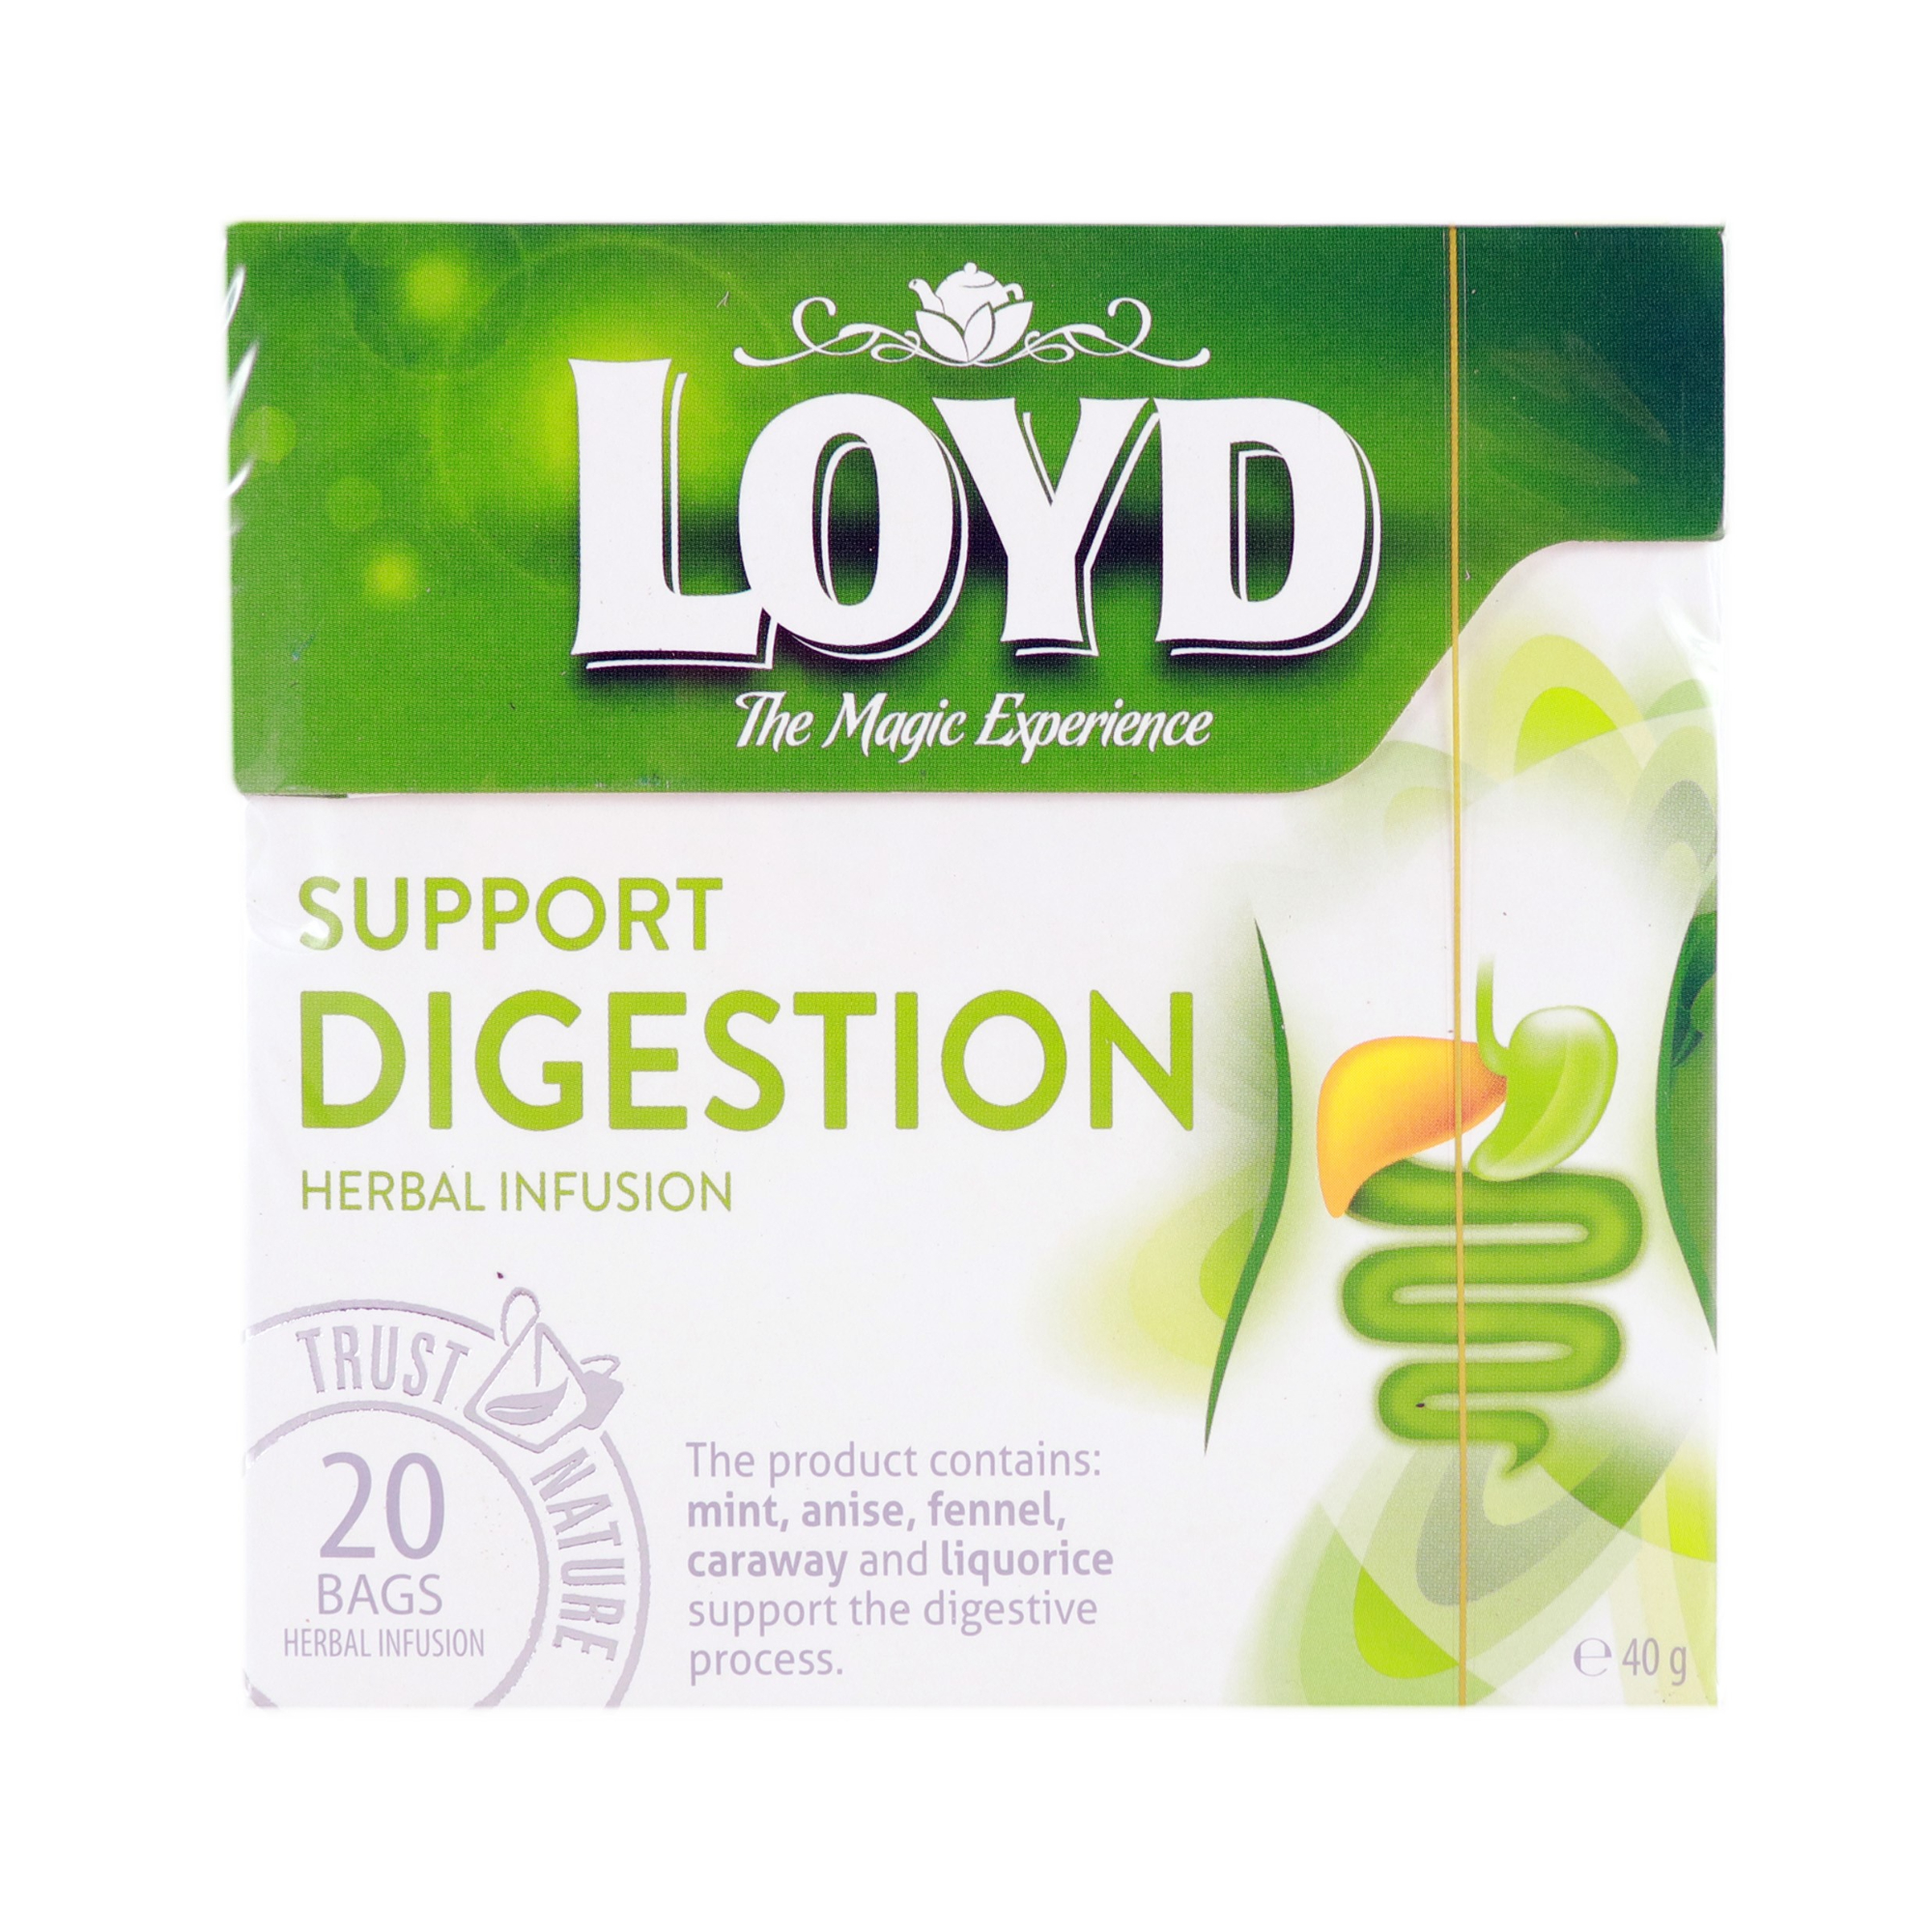 Loyd Support Digestion Herbal Infusion Tea (2g x 20pcs)